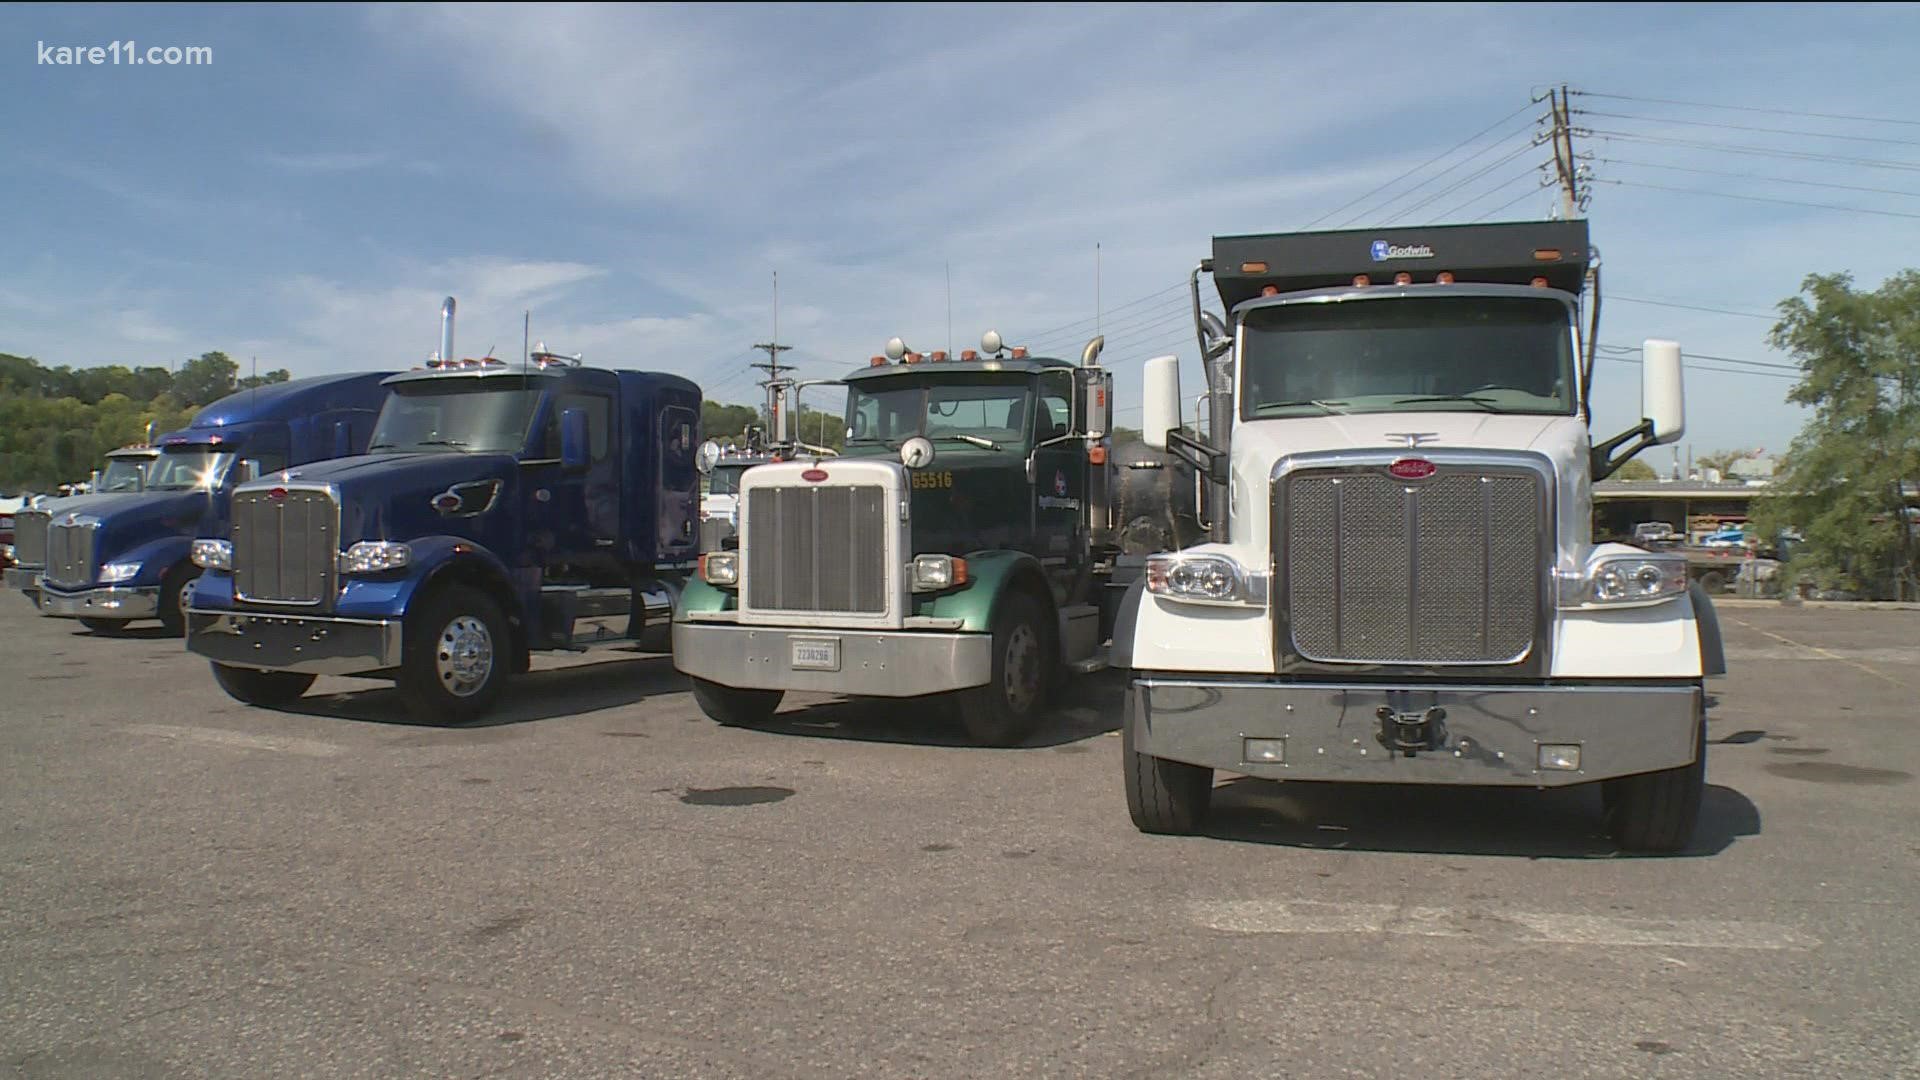 Minnesota's Allstate Peterbilt Group says it has an unprecedented number of trucks stuck at its repair shop waiting for parts.